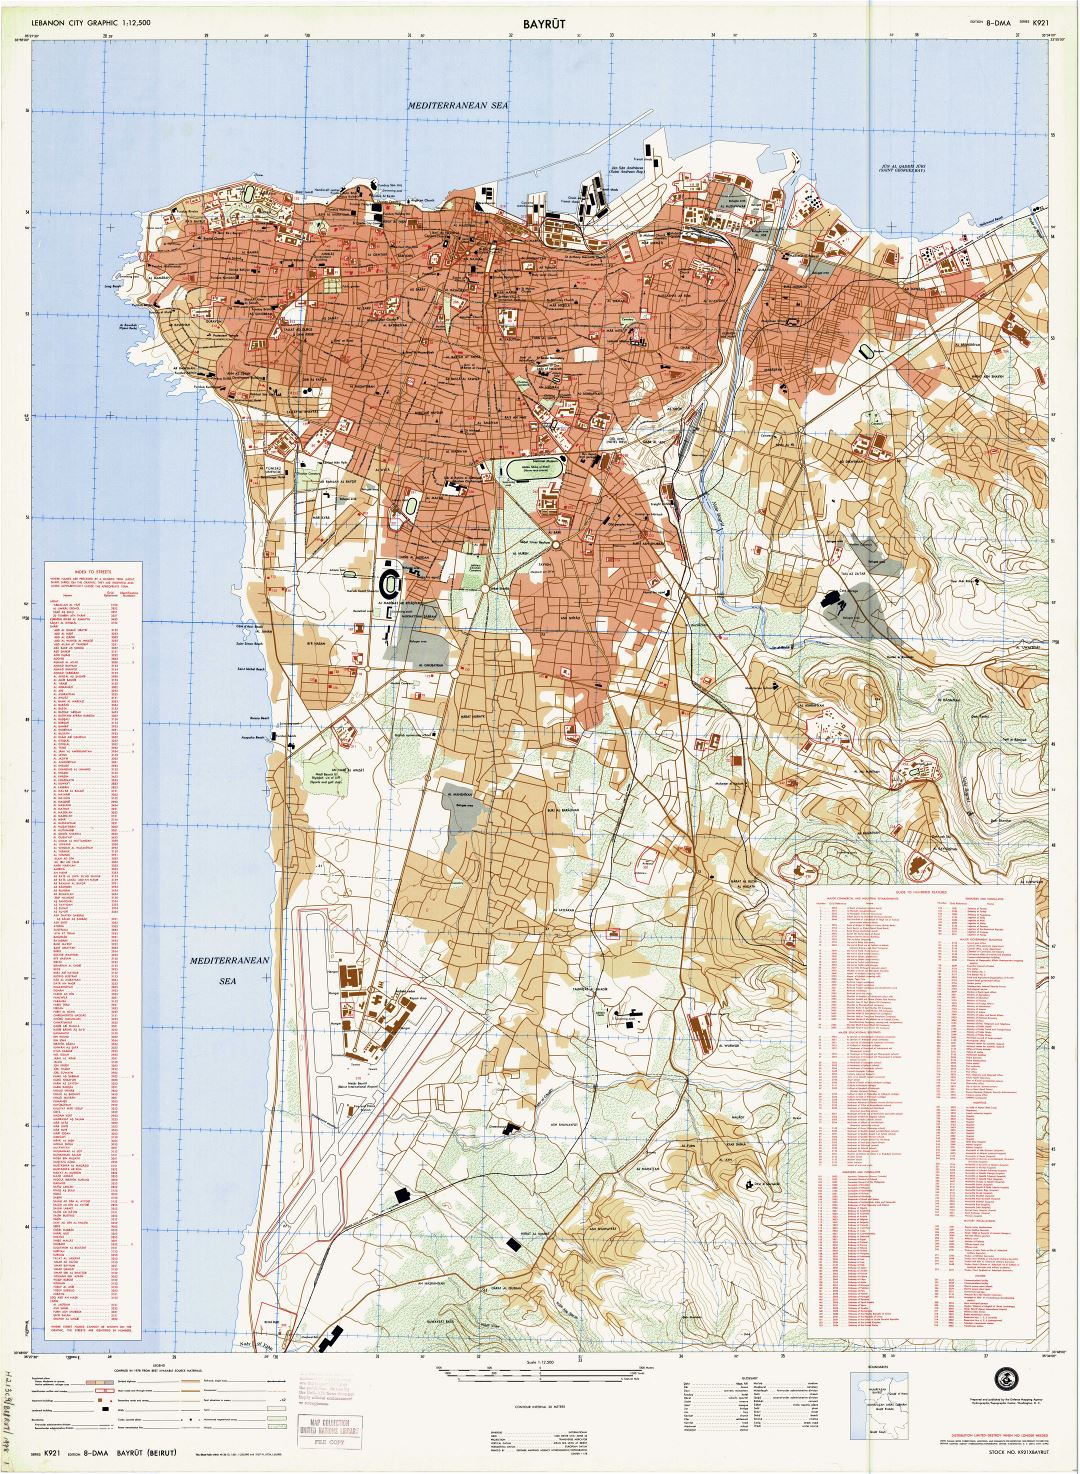 Large scale detailed road map of Beirut city with street names - 1978